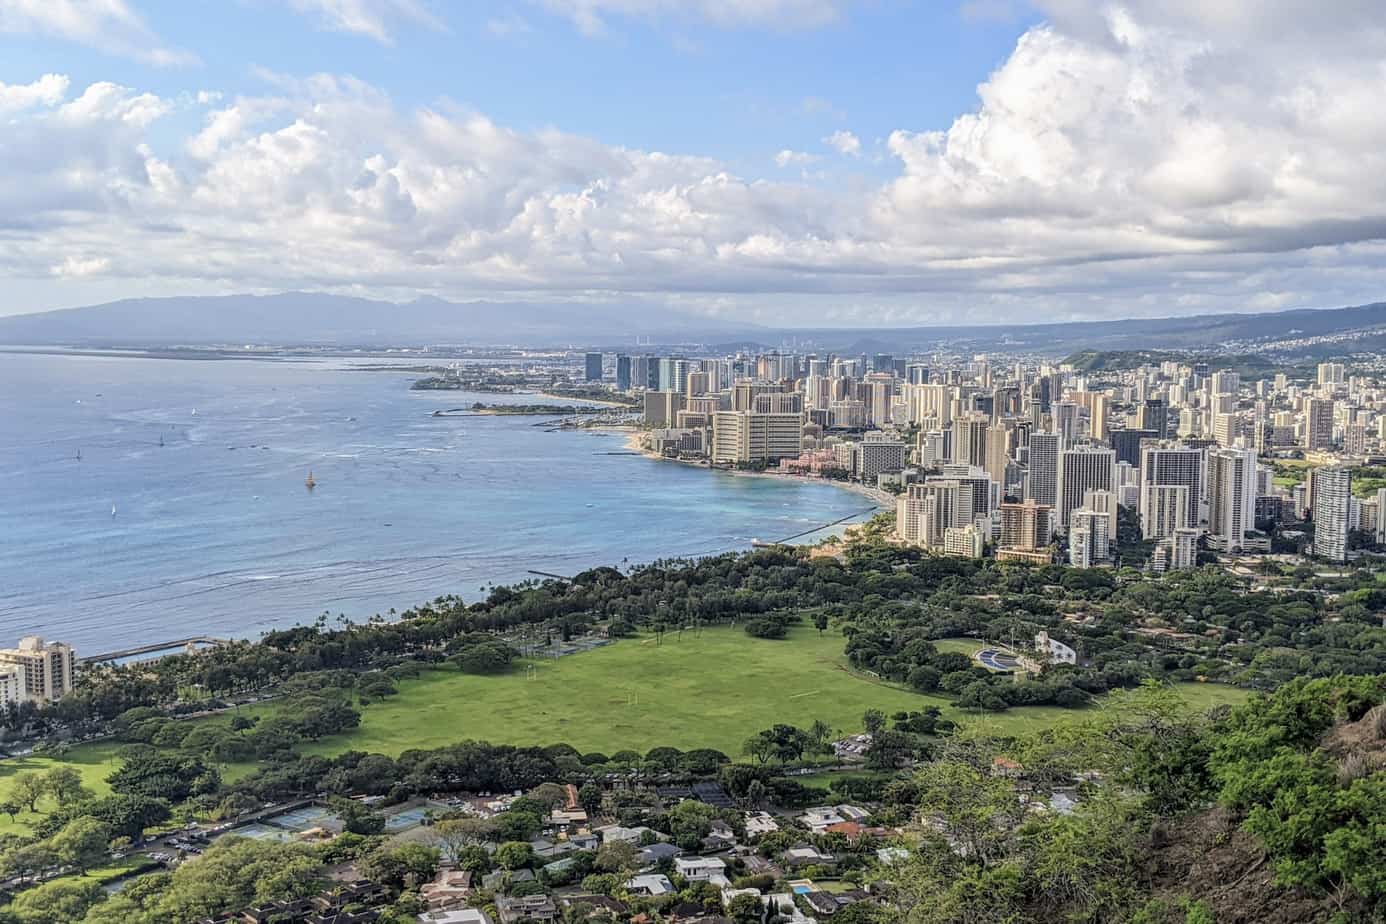 View of Waikiki From Diamond Head- City building on the beach with ocean